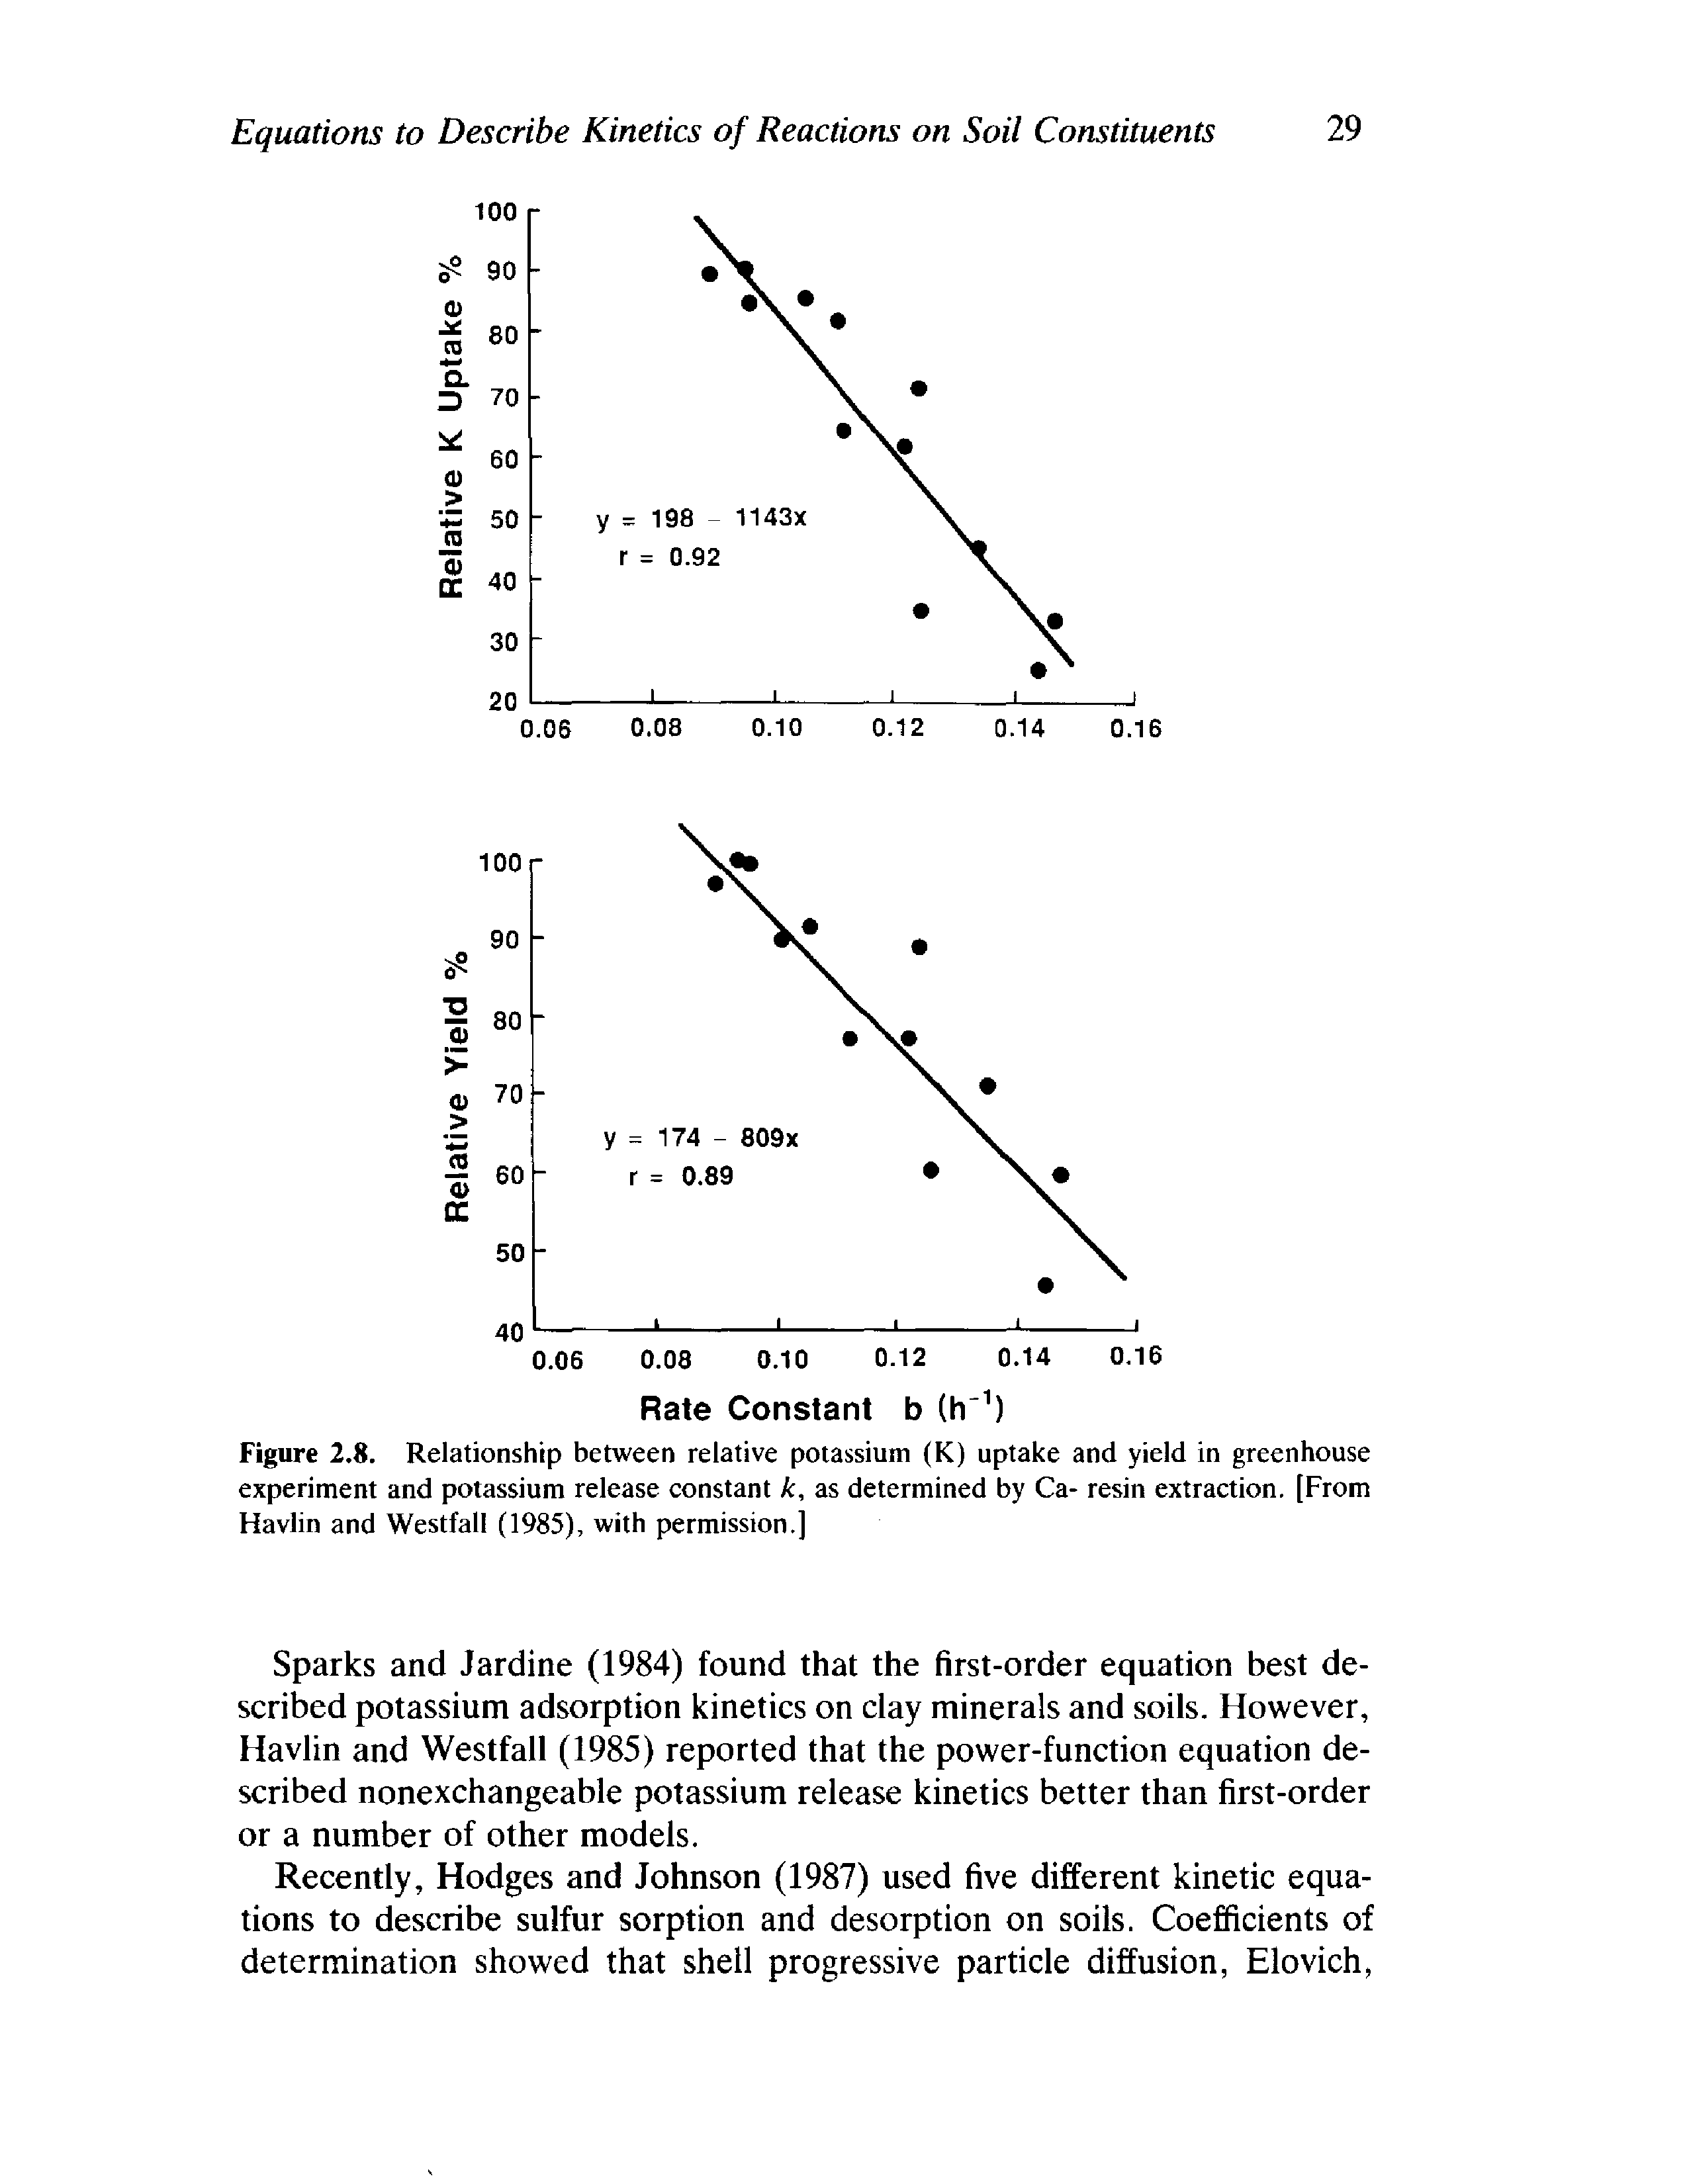 Figure 2.8. Relationship between relative potassium (K) uptake and yield in greenhouse experiment and potassium release constant k, as determined by Ca- resin extraction. [From Havlin and Westfall (1985), with permission.]...